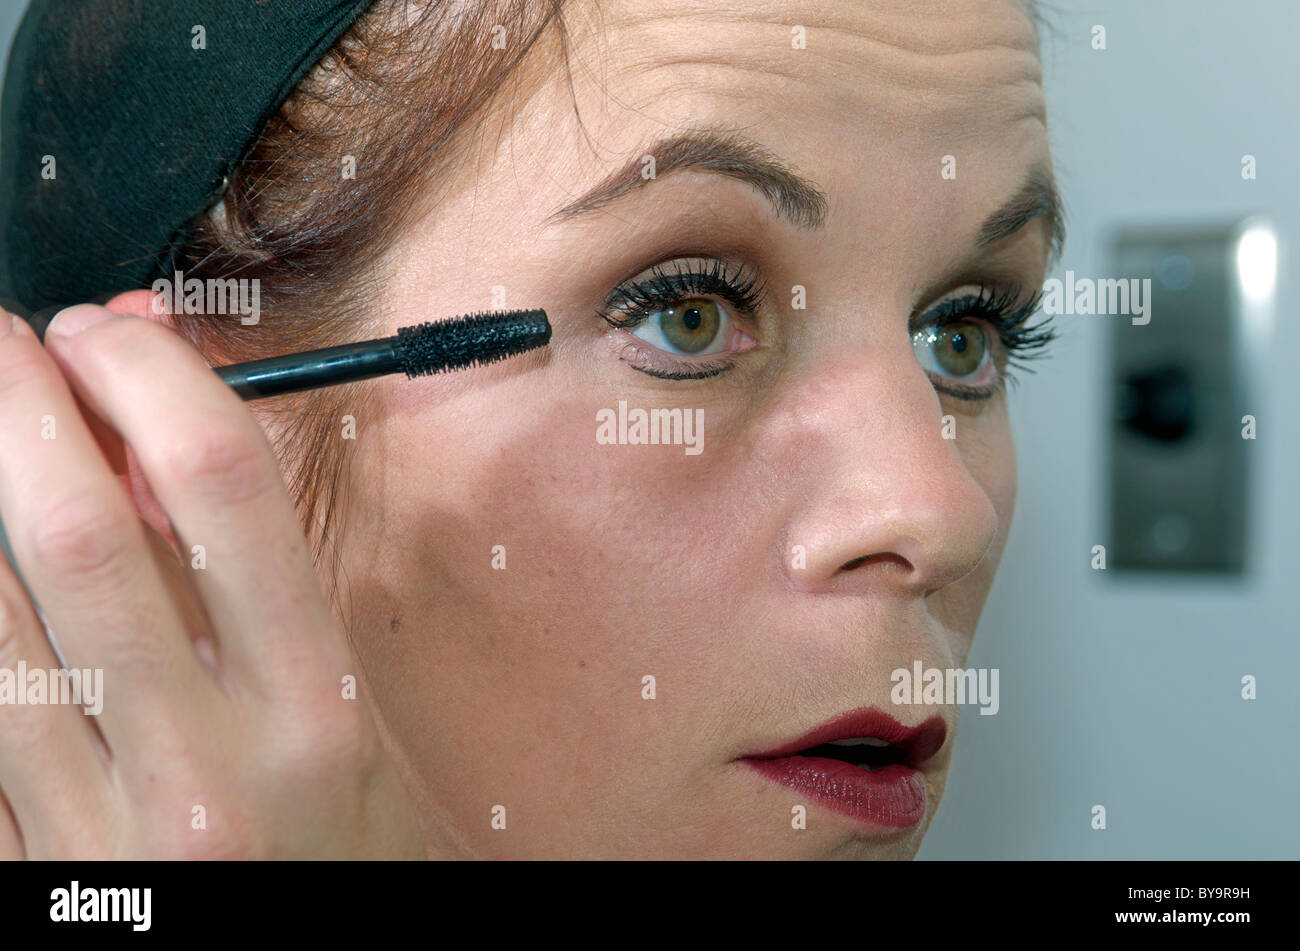 Back stage final make up touches - applying mascara Stock Photo